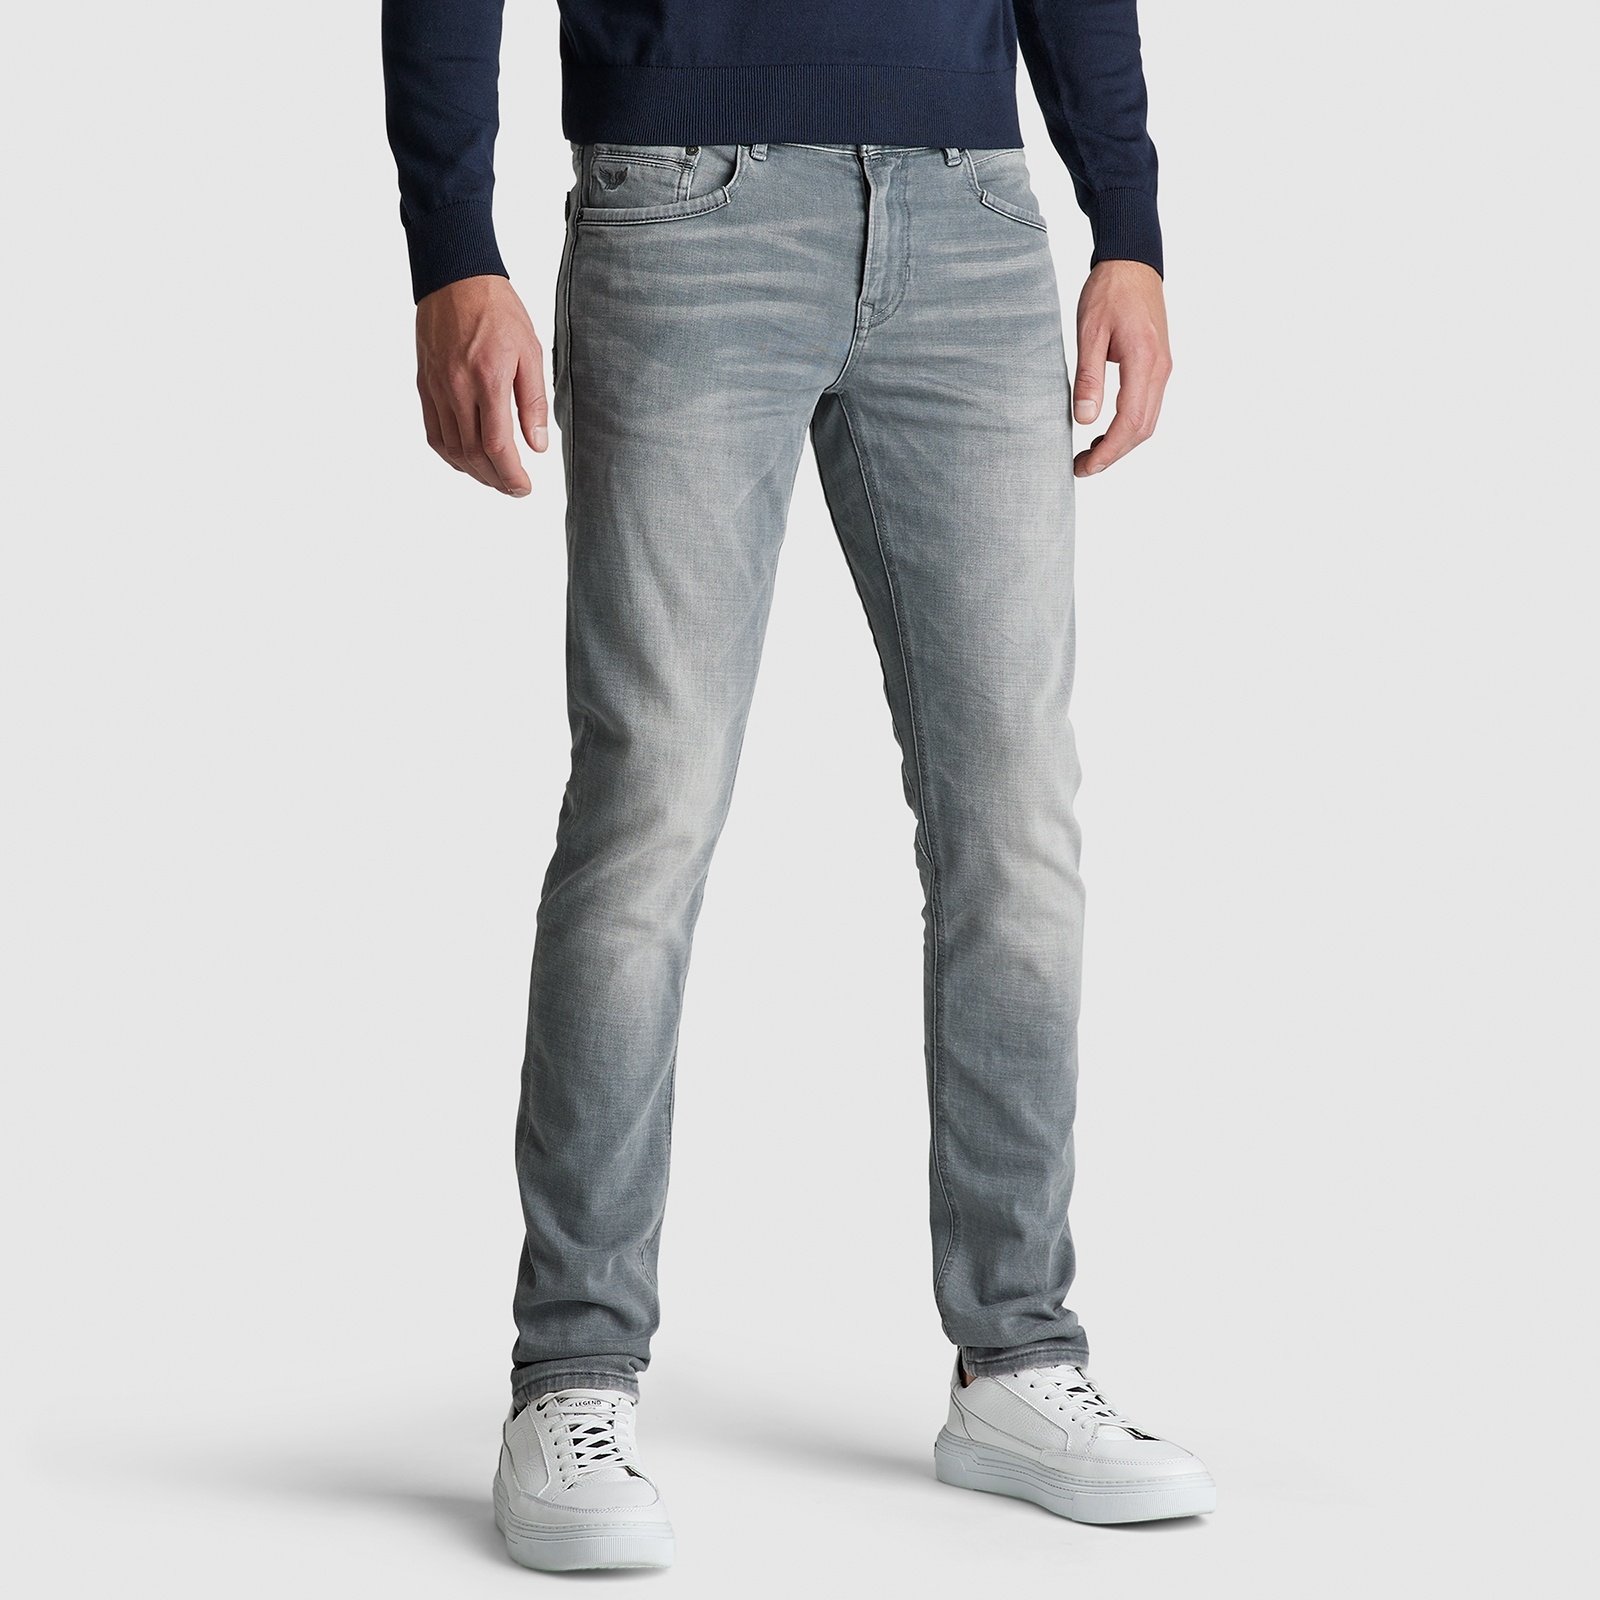 PME LEGEND TAILWHEEL JEANS - KING Jeans & Casuals